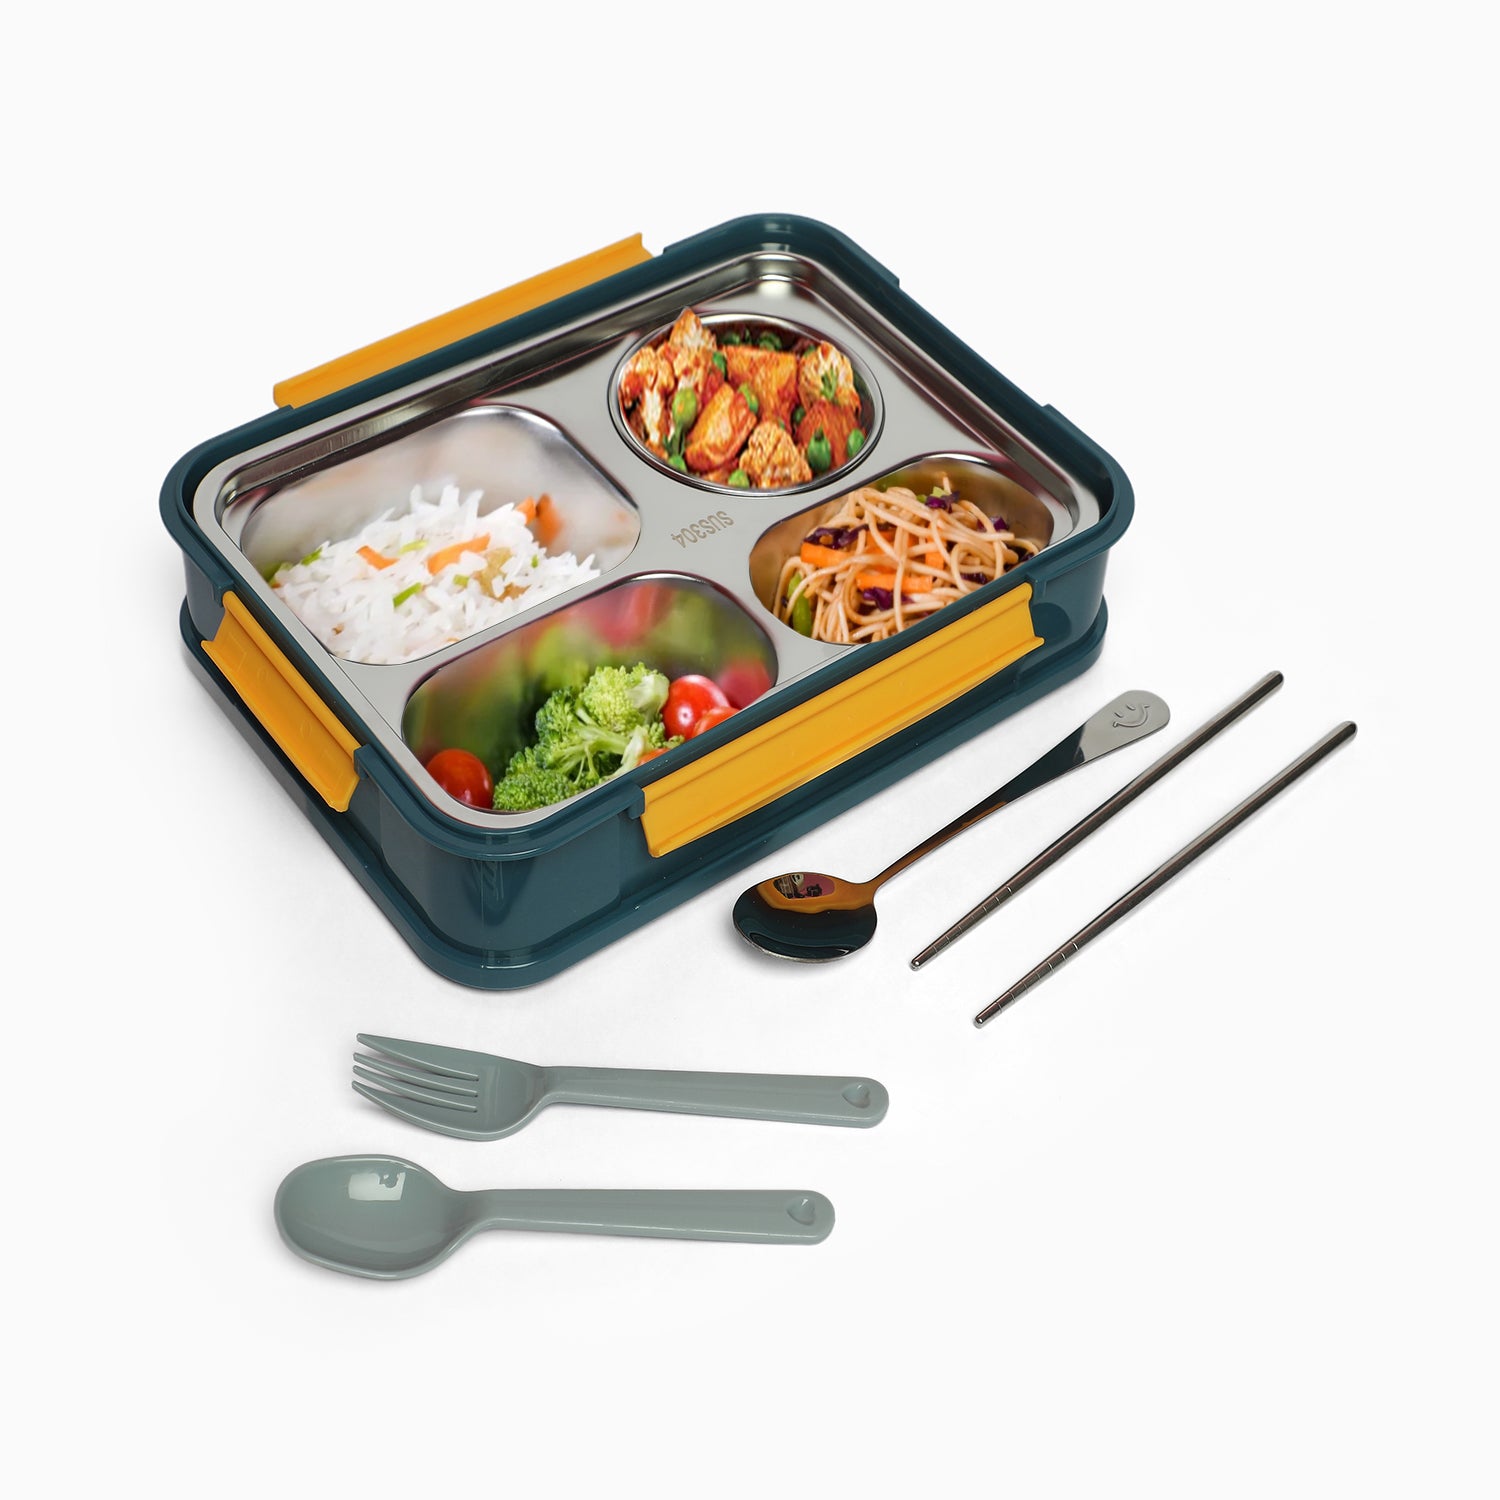 Food stainless steel 4 compartment lunchbox -1000 ml (blue)